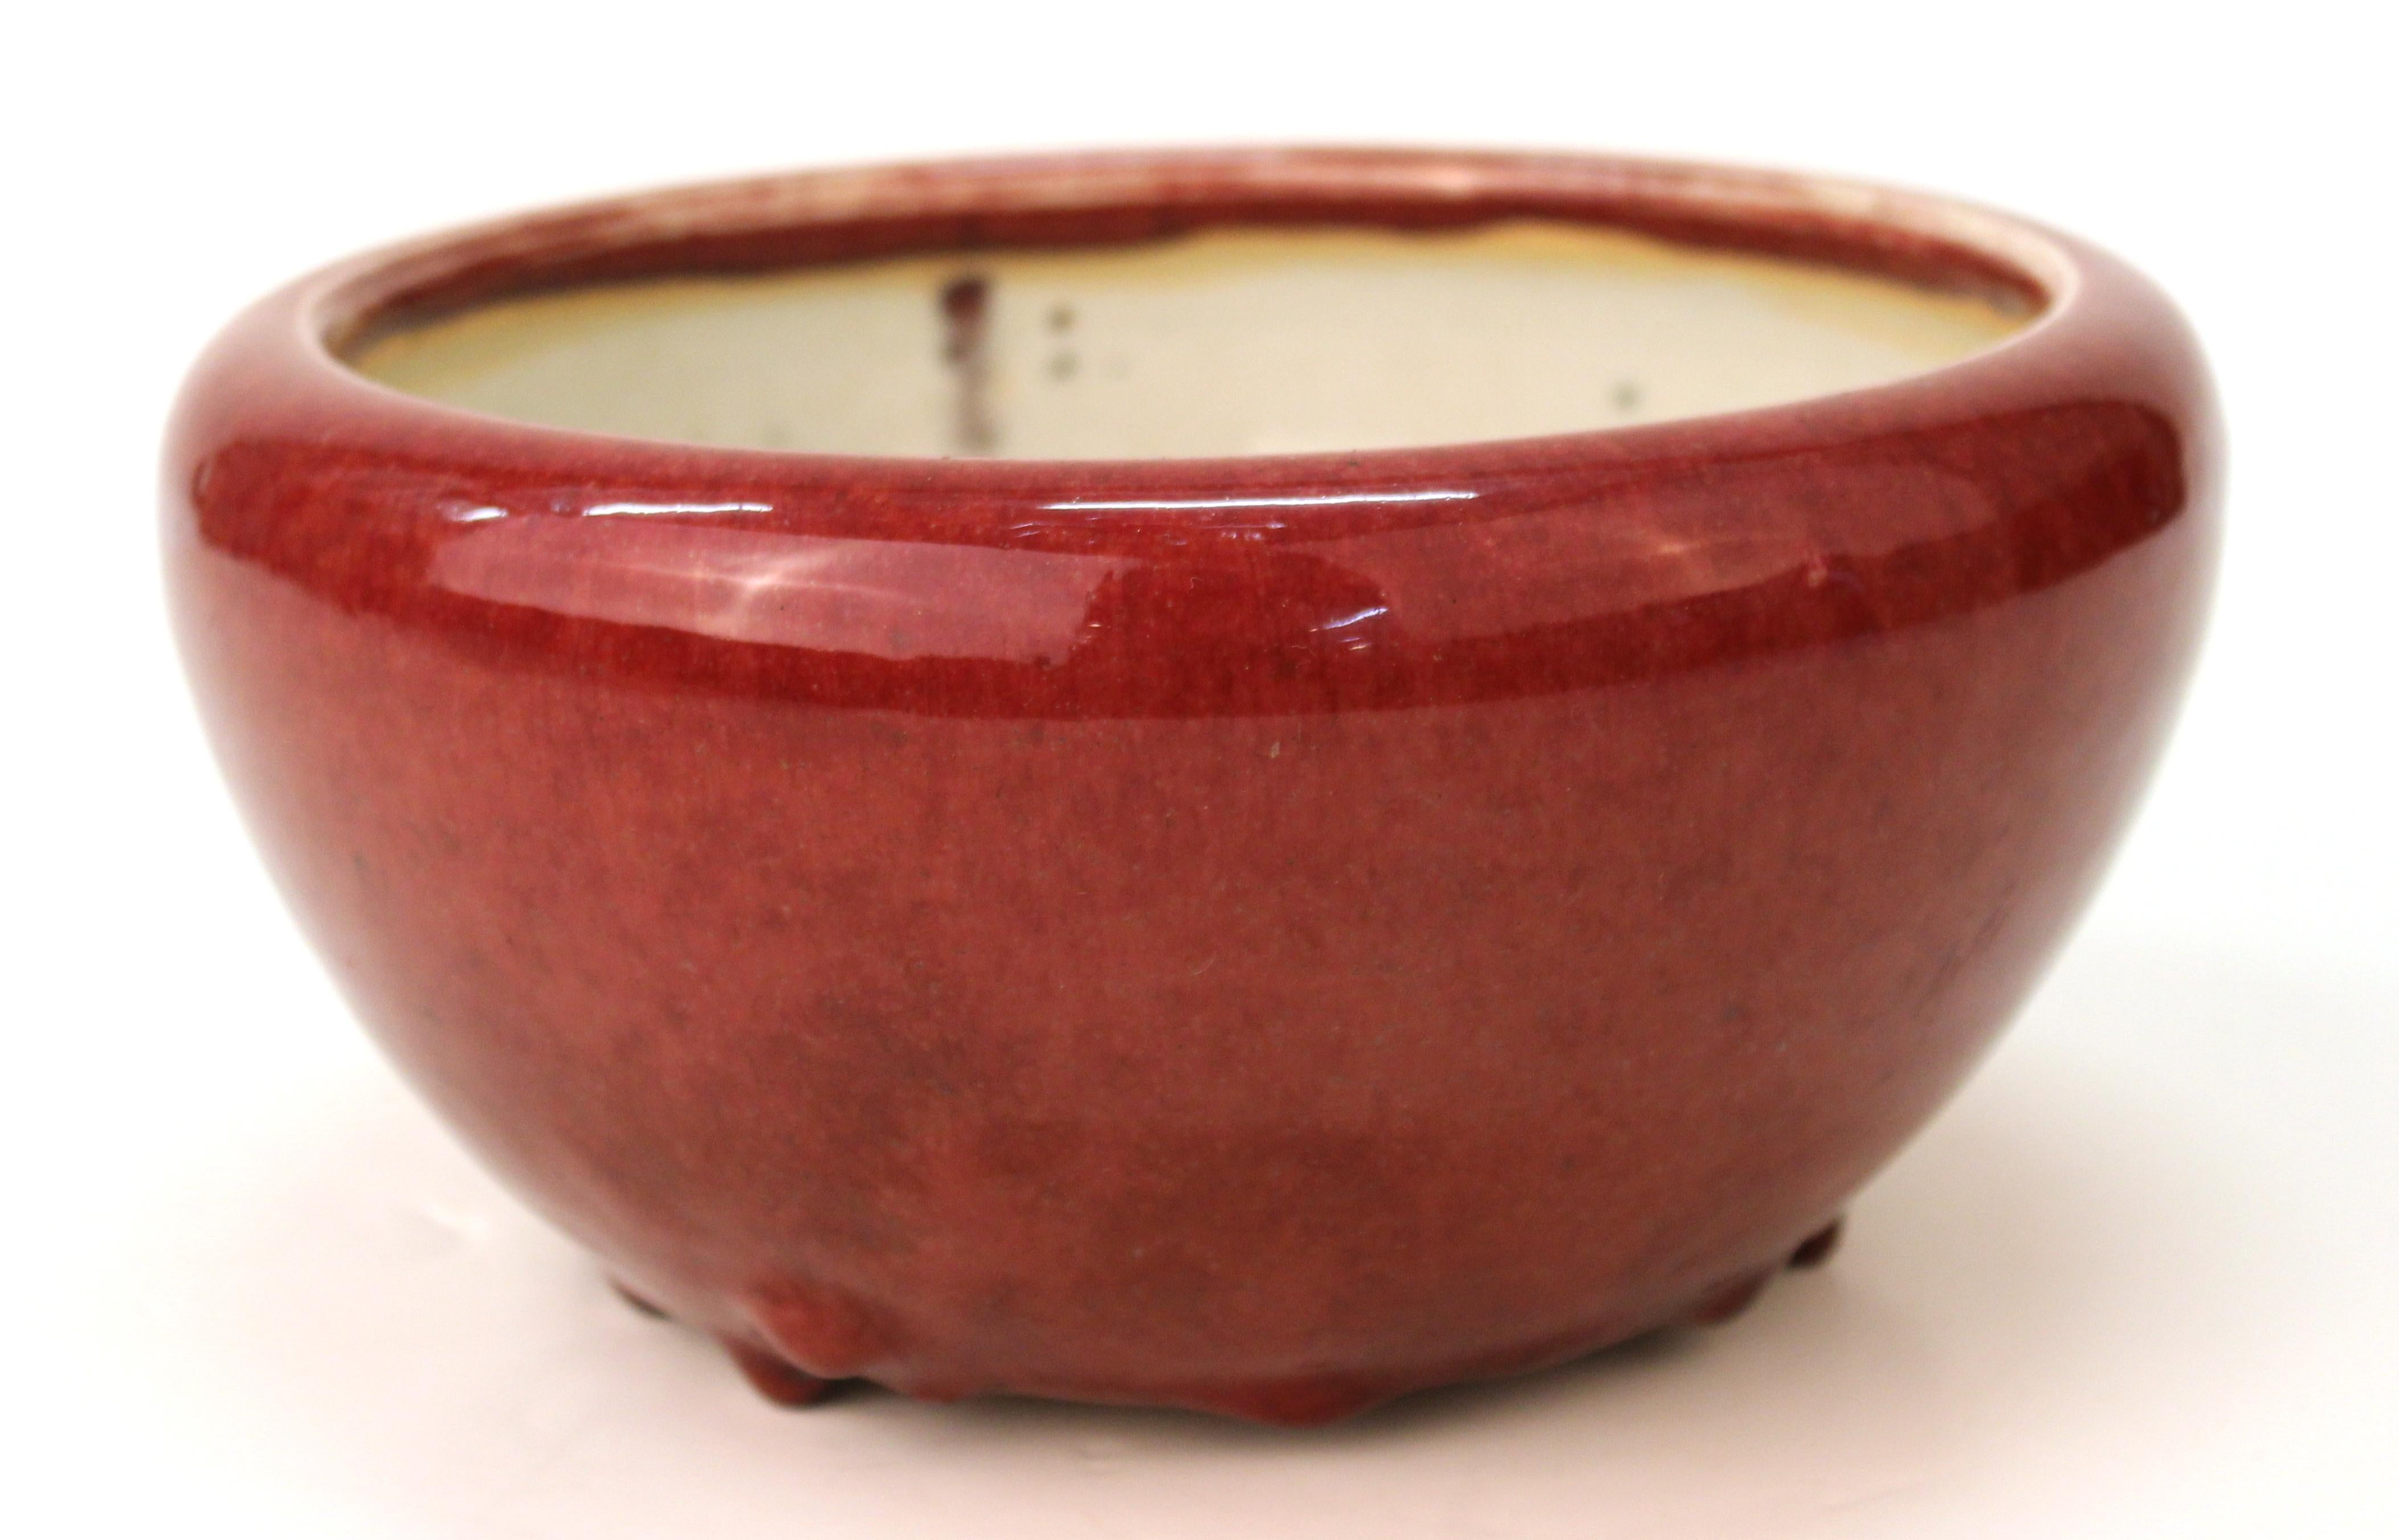 Chinese oxblood enamel-glazed incense burner bowl, the foot with controlled heavy glaze drips. The piece was made in China, possibly during the early 20th century and is in good vintage condition.